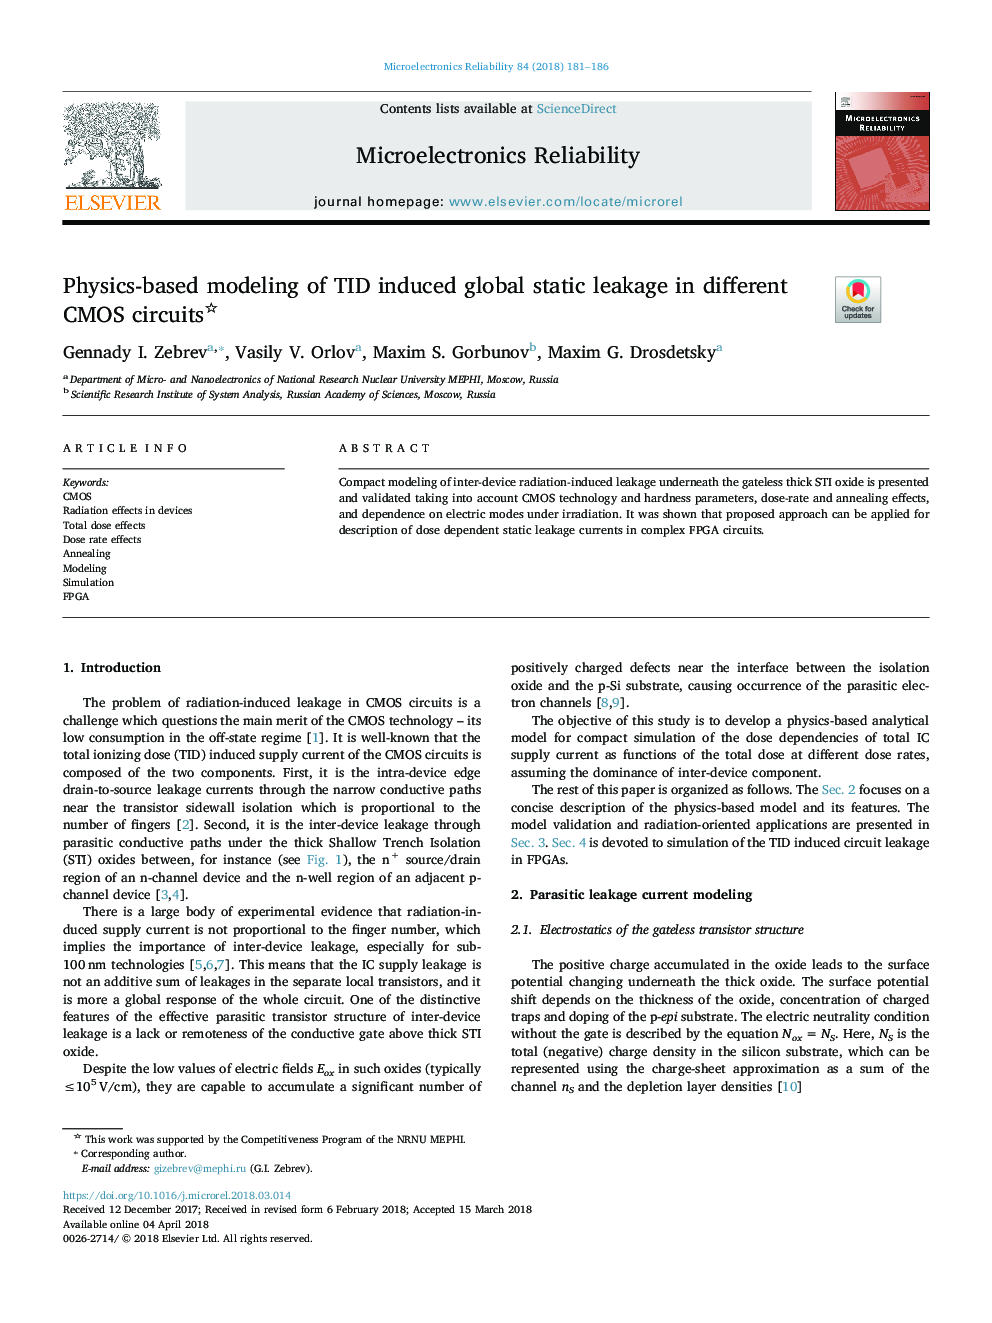 Physics-based modeling of TID induced global static leakage in different CMOS circuits